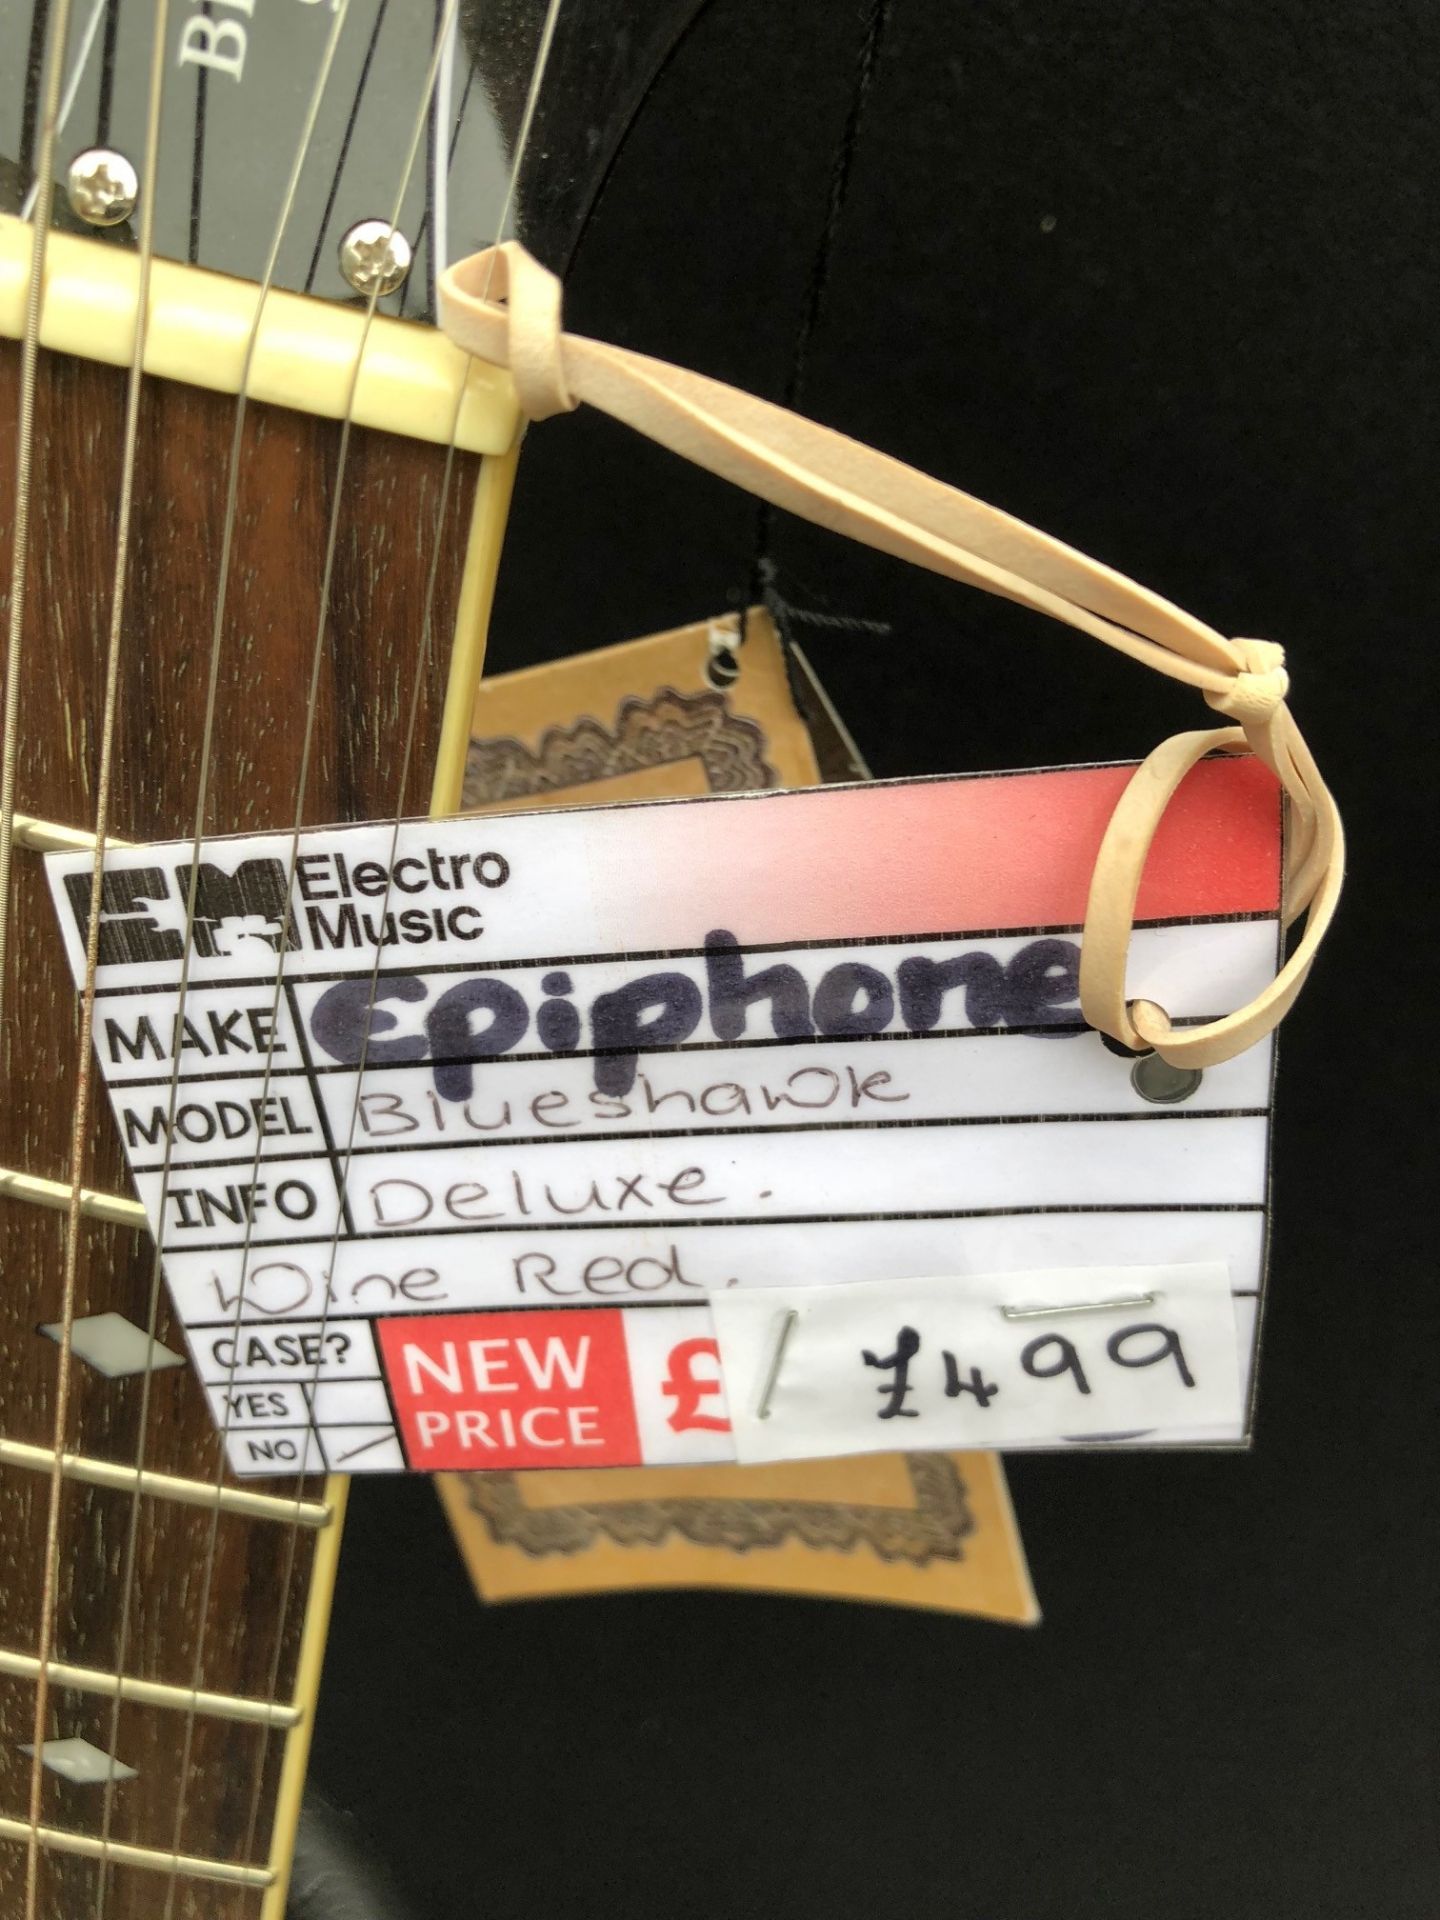 Epiphone Blueshawk Deluxe Wine Red Electric Guitar (Brand New Ex Display - RRP £499.00) - Image 4 of 6